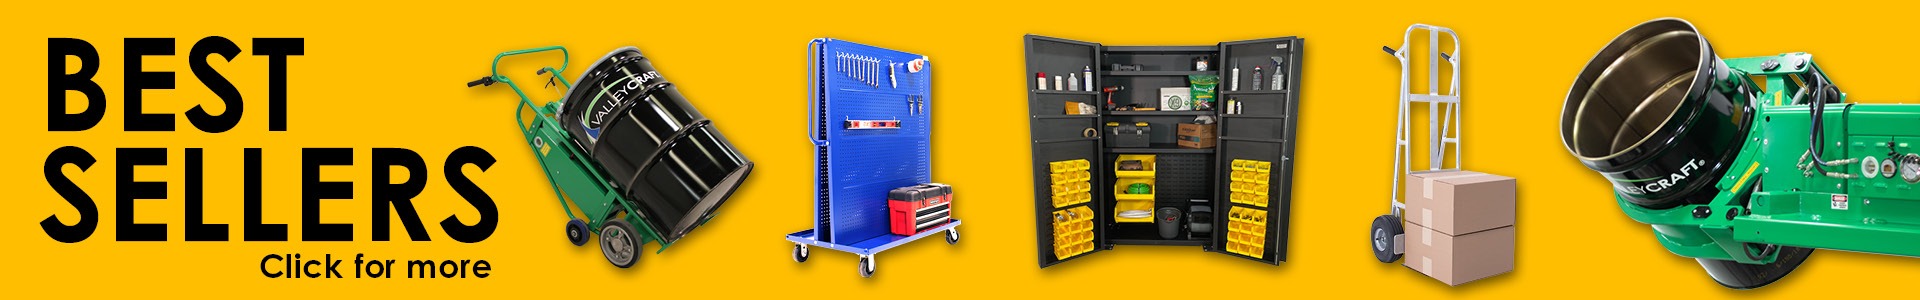 Valley Craft best sellers - click here for more material handling, drum handling, and storage solutions